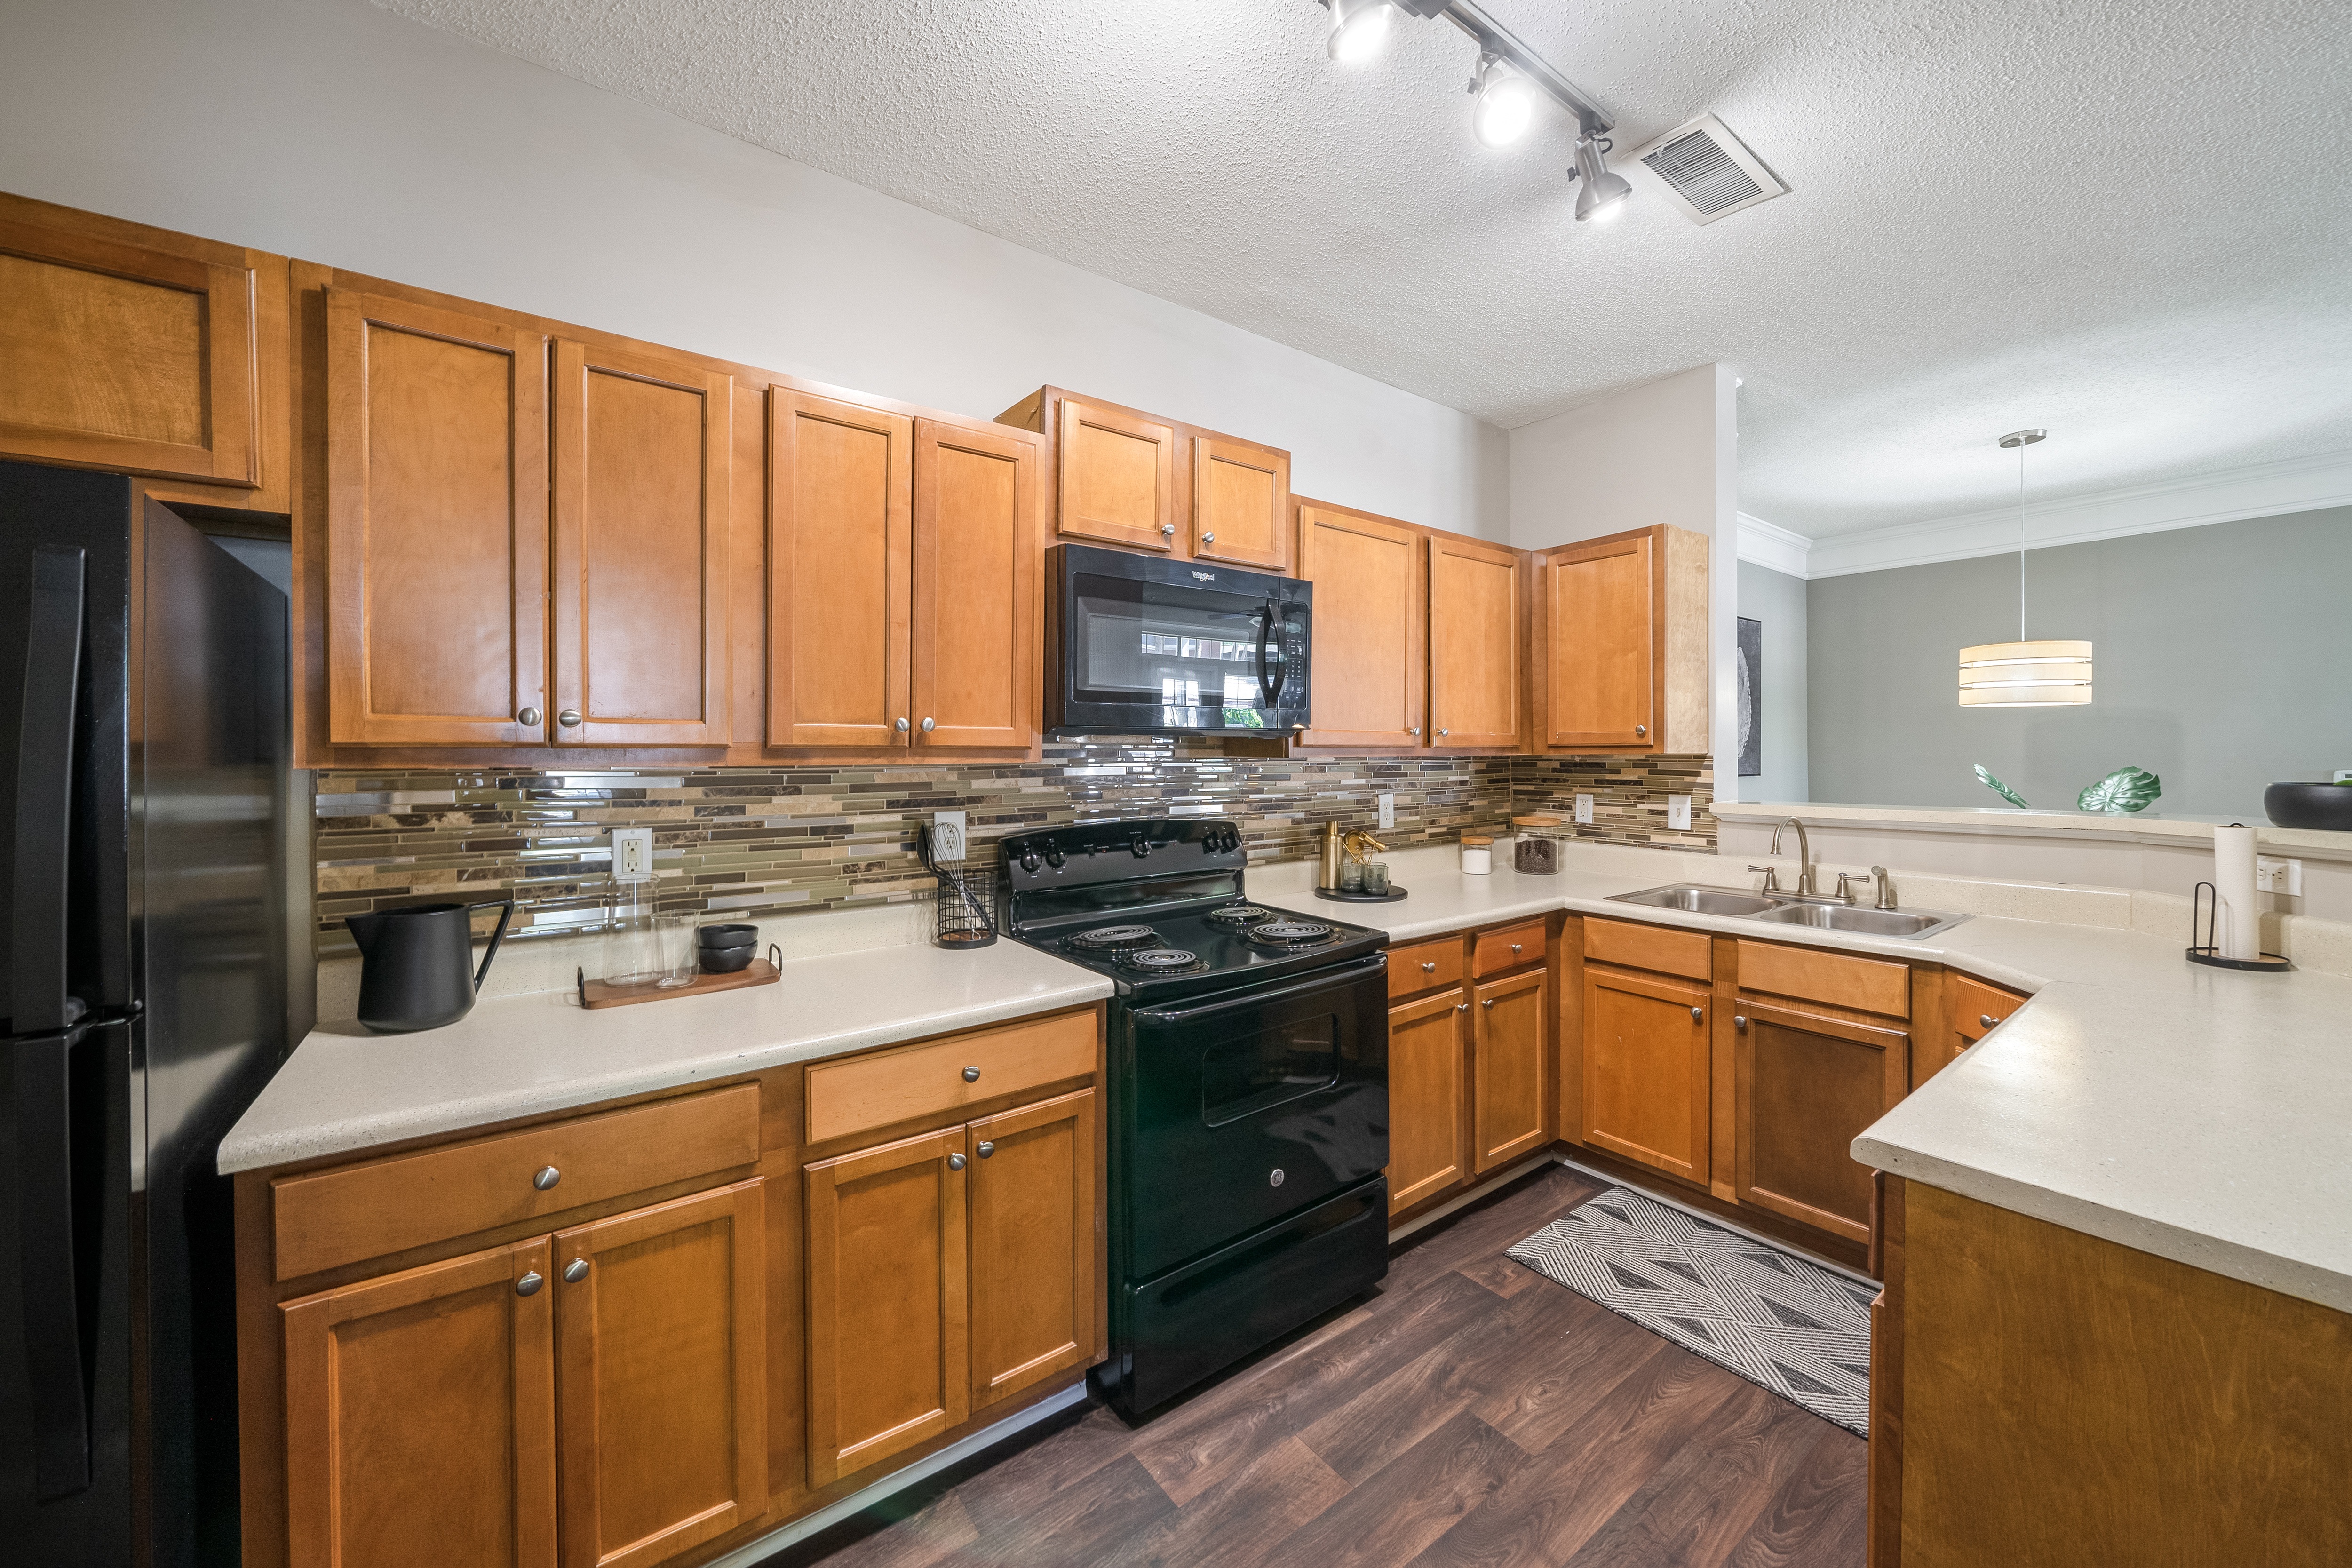 Spacious Kitchen with Black Appliances and ample storage at Sugarloaf Crossings Apartments in Lawrenceville, GA 30046